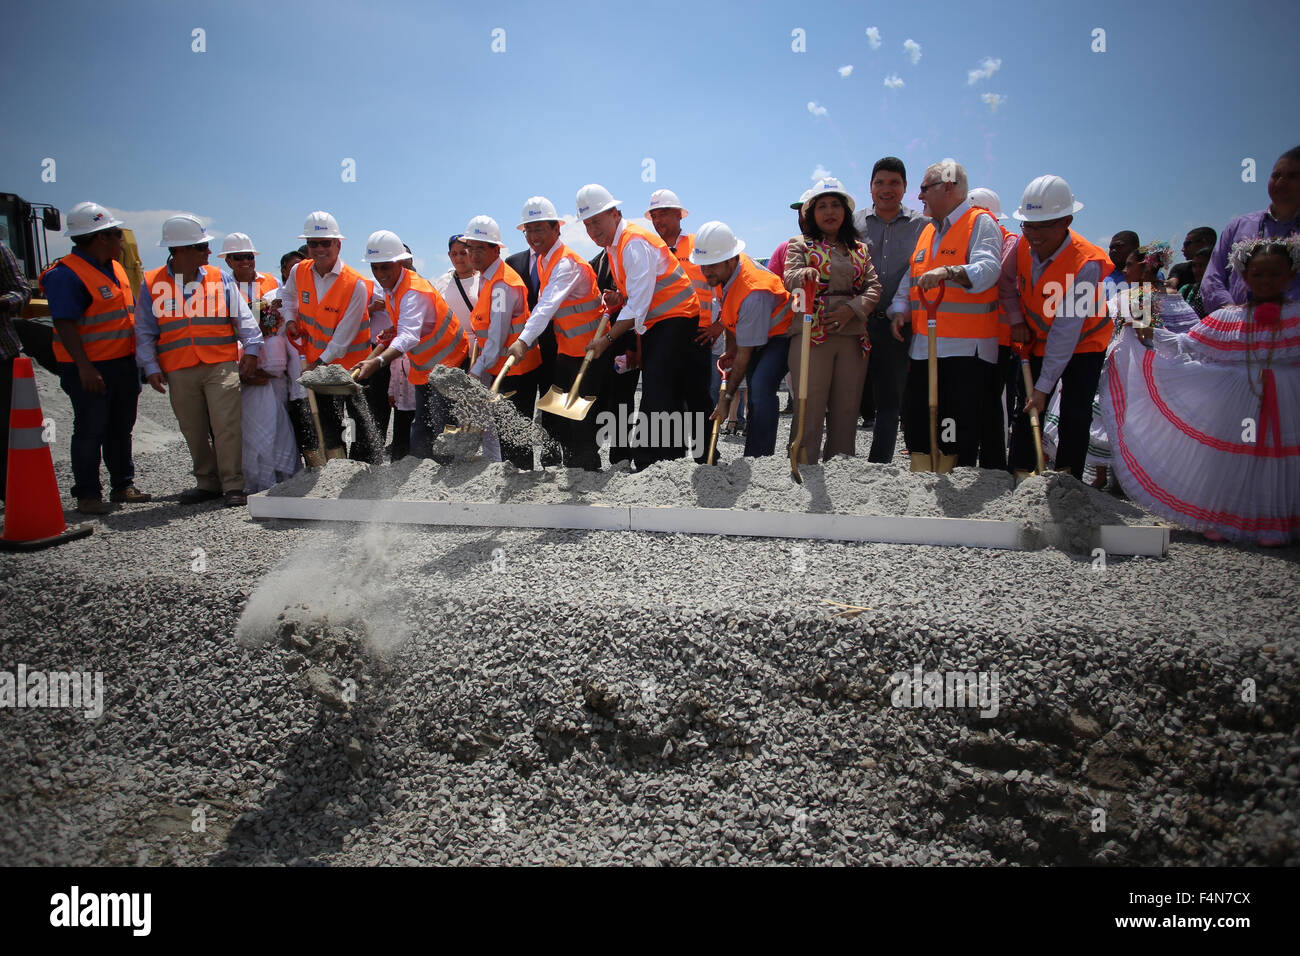 (151021) -- PANAMA CIY, Oct. 21, 2015 (Xinhua) -- Panamanian President Juan Carlos Varela (C Front), attends the ceremony marking the official go-ahead for the construction work of the residential project Ciudad de Esperanza, in Arraijan, Panama, on Oct. 19, 2015. Panama's largest residential development project, Ciudad de Esperanza or City of Hope, broke ground on Monday in the West Panama Province. The 137 million-U.S. dollar project, to be constructed by China Construction America (CCA) - MCM Consortium, will benefit 11,250 people in the city of Vista Alegre, in the province's Arraijan dis Stock Photo